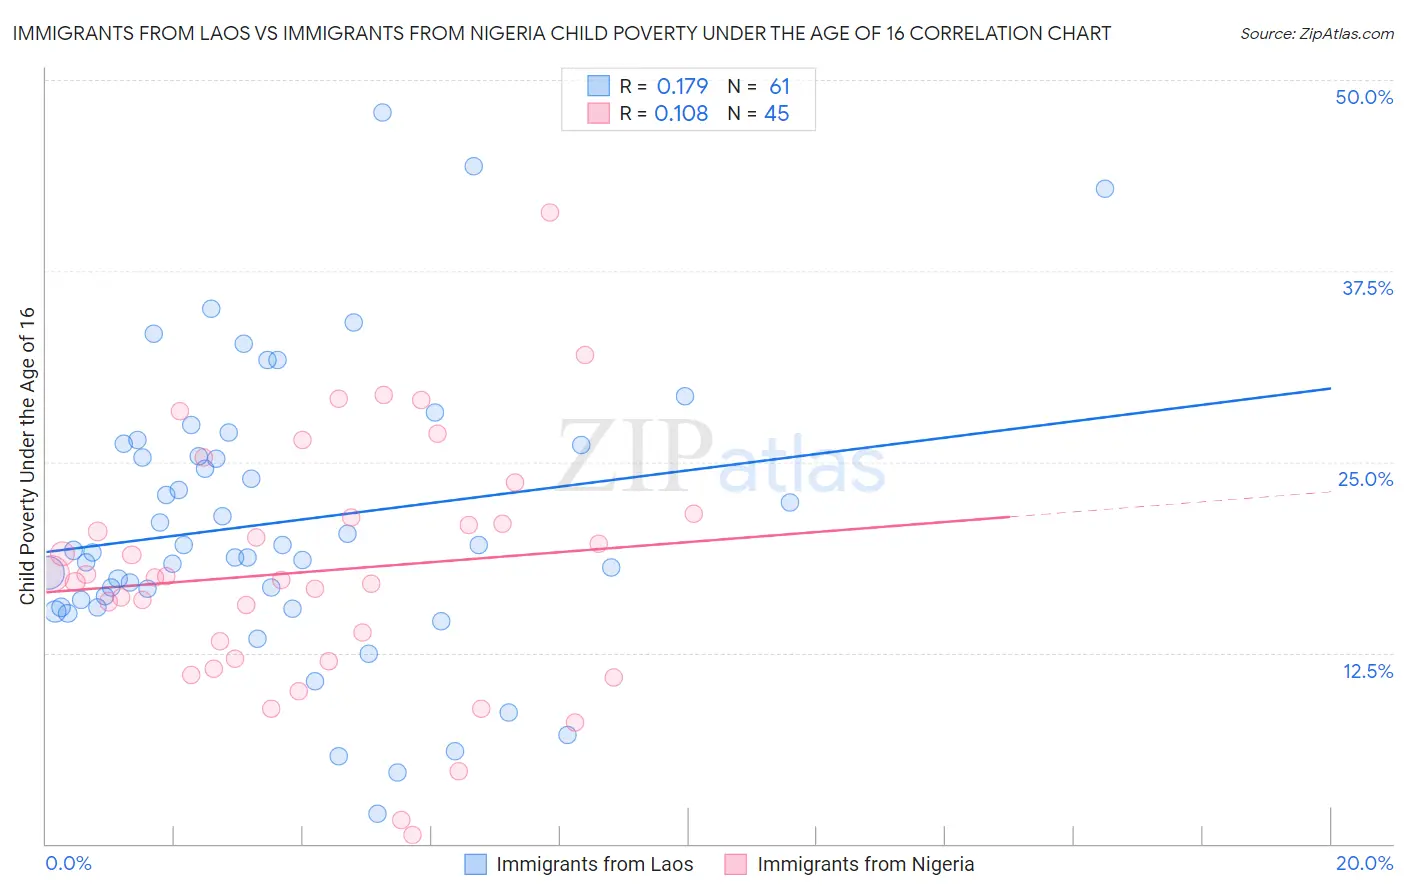 Immigrants from Laos vs Immigrants from Nigeria Child Poverty Under the Age of 16